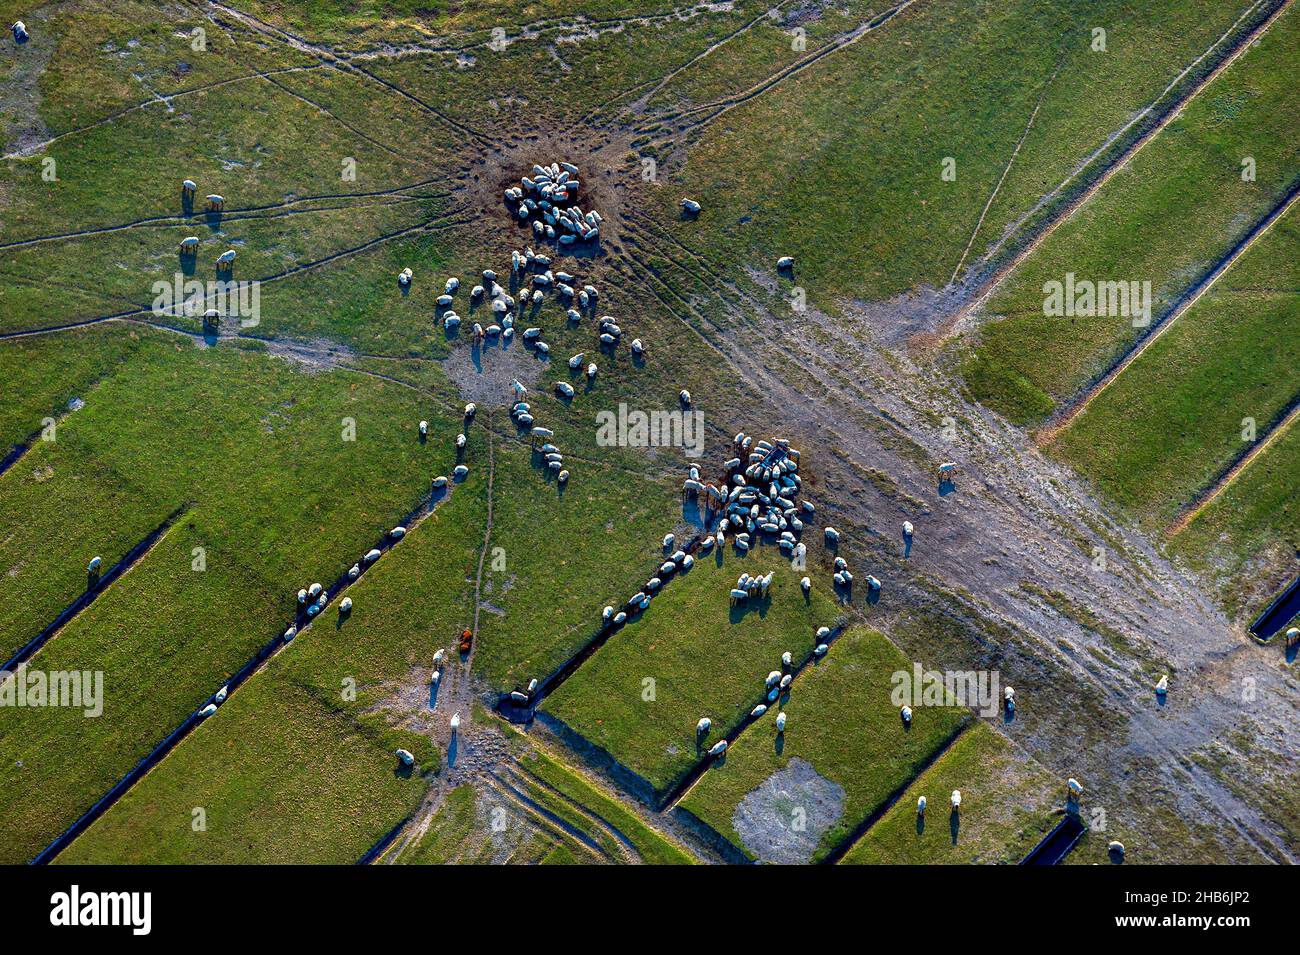 domestic sheep (Ovis ammon f. aries), flock of sheep on grassland of an outer dike with old drainage ditches, aerial view , Germany, Stock Photo